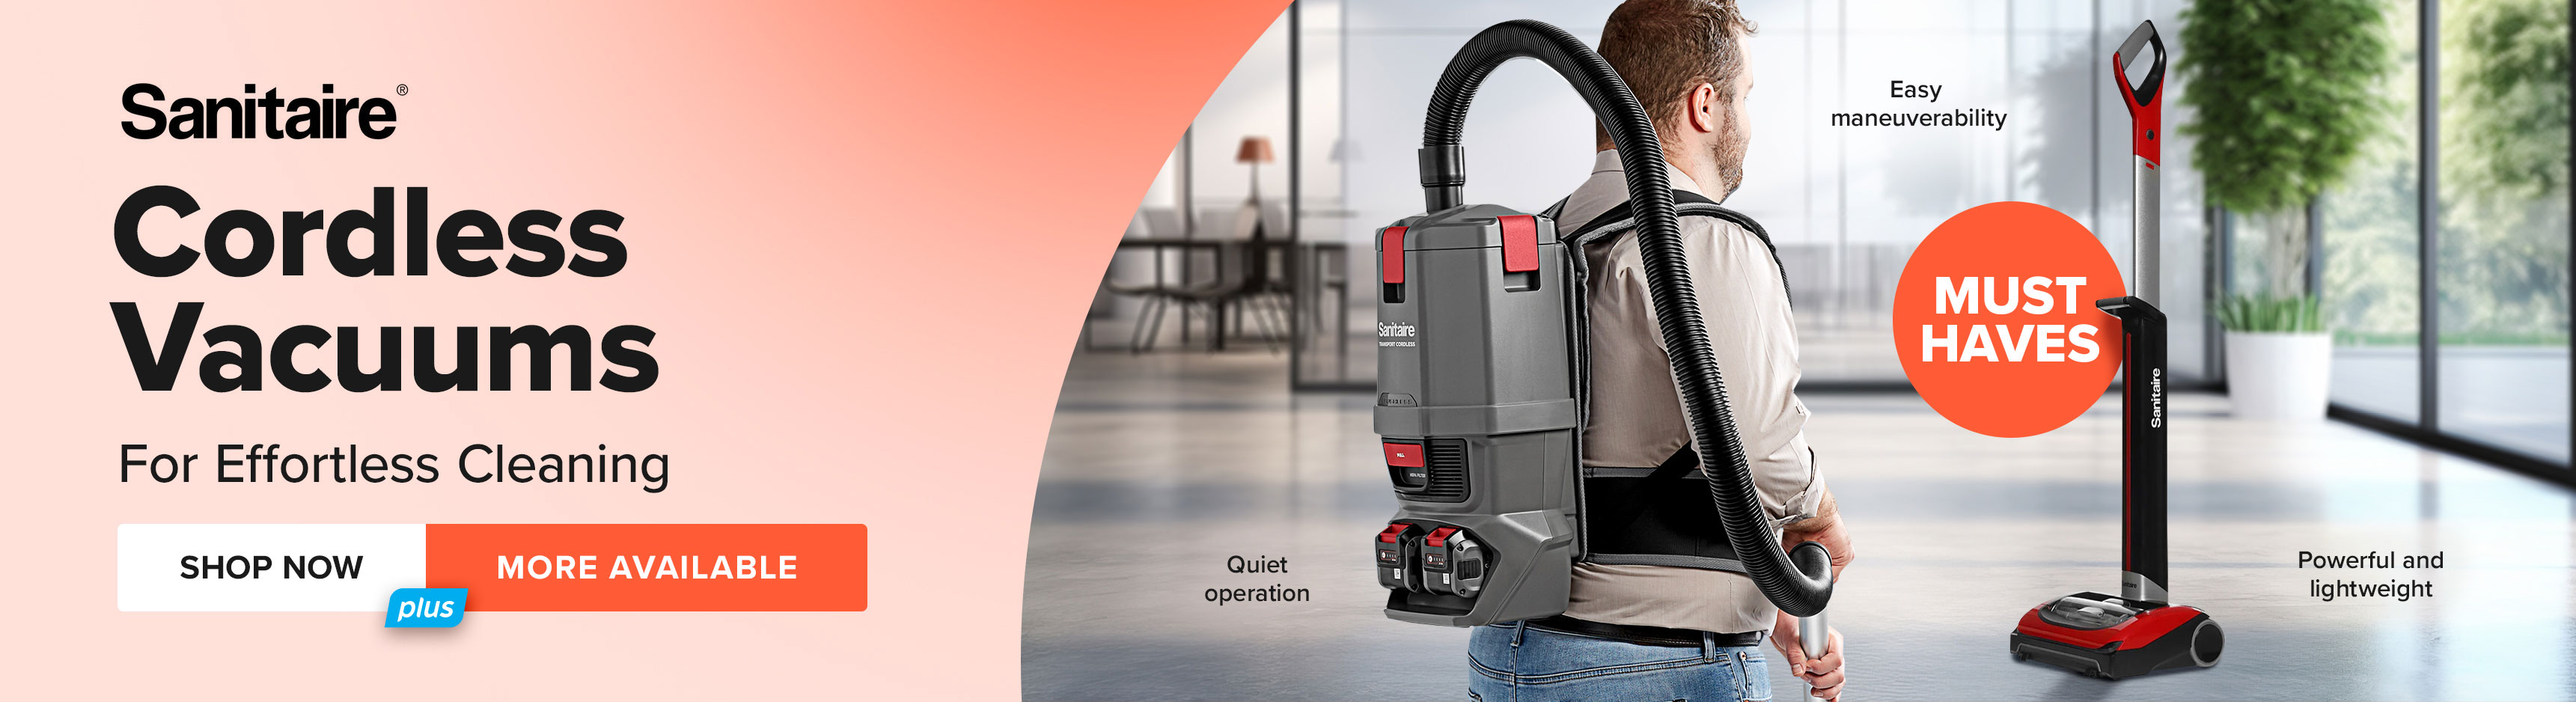 Sanitaire Cordless Vacuums, For Effortless Cleaning, No Code Needed